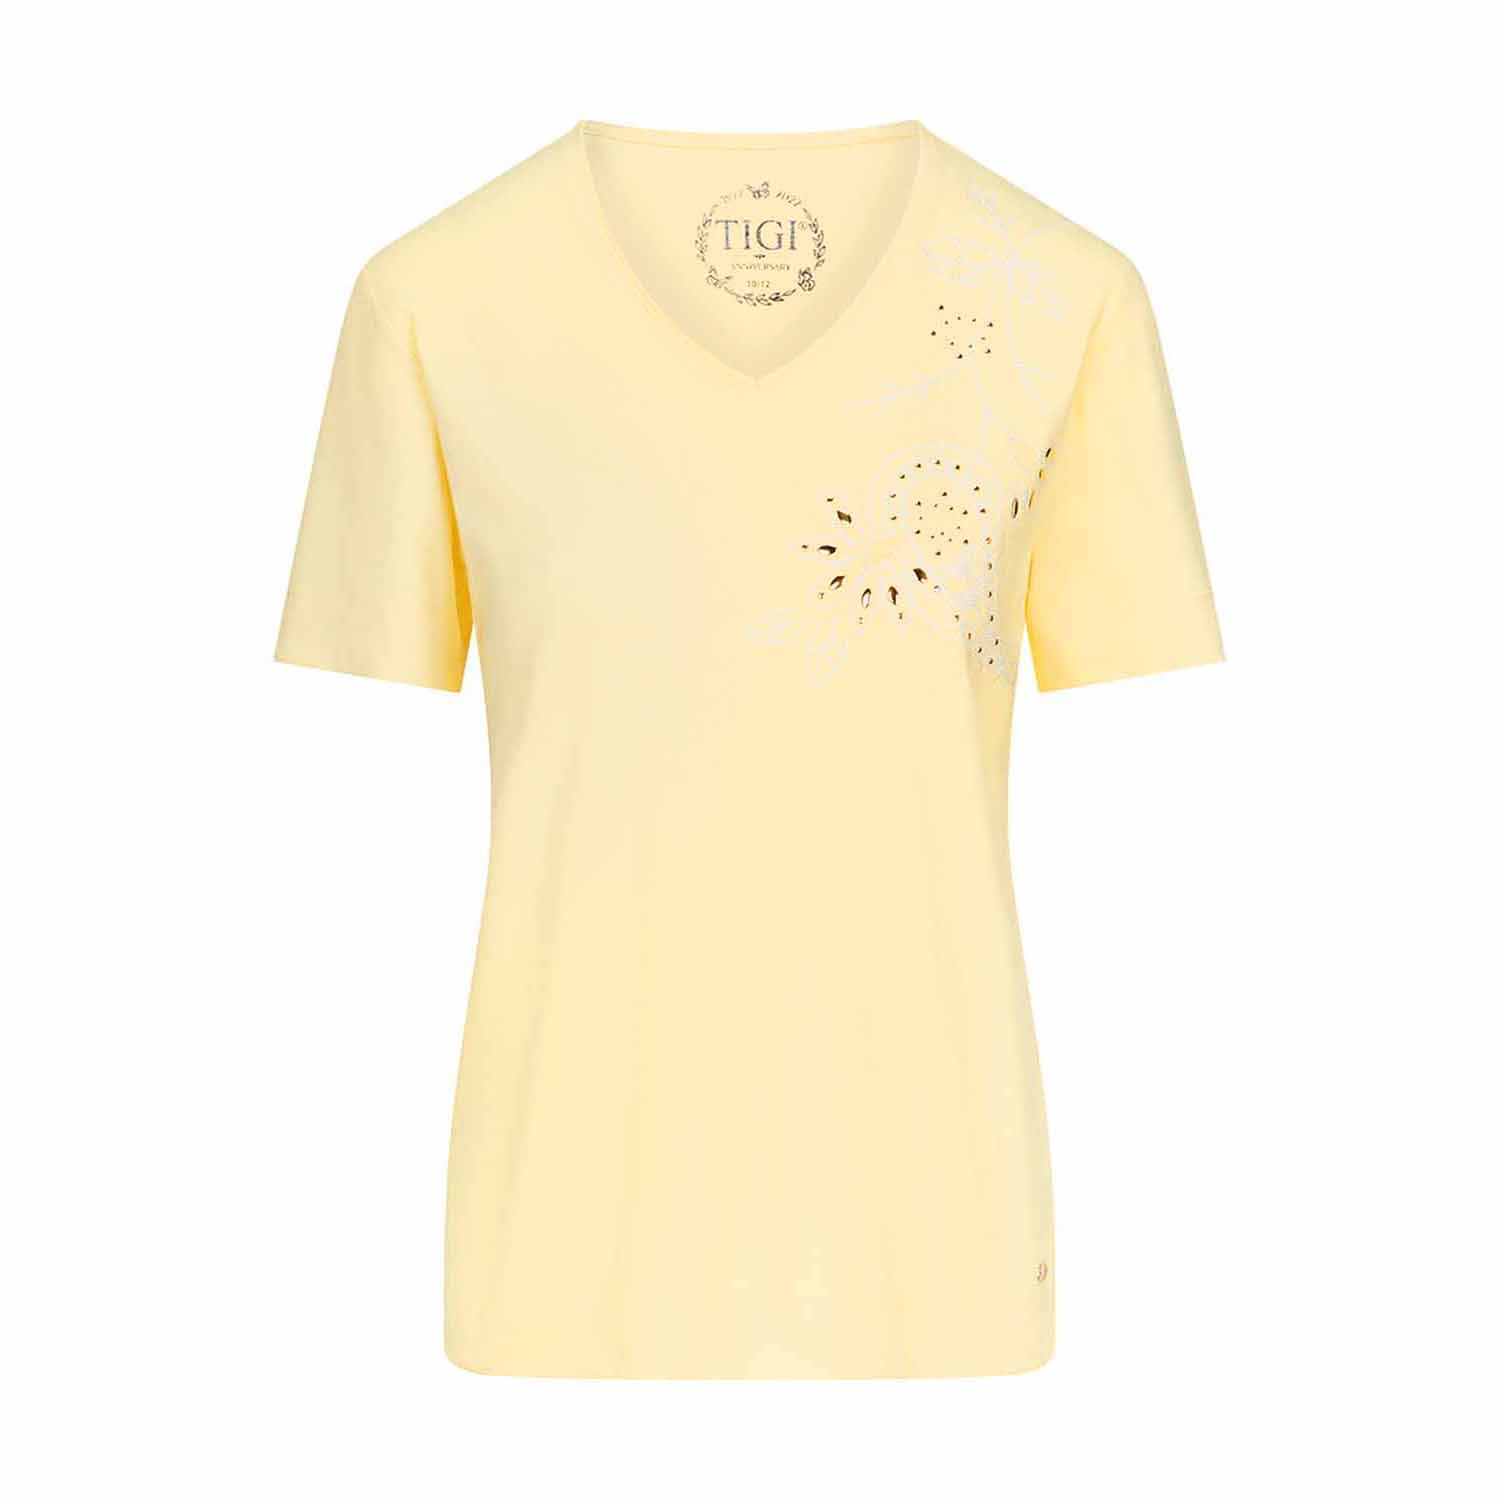 Tigiwear Floral Embroidered Top - Lemon 4 Shaws Department Stores